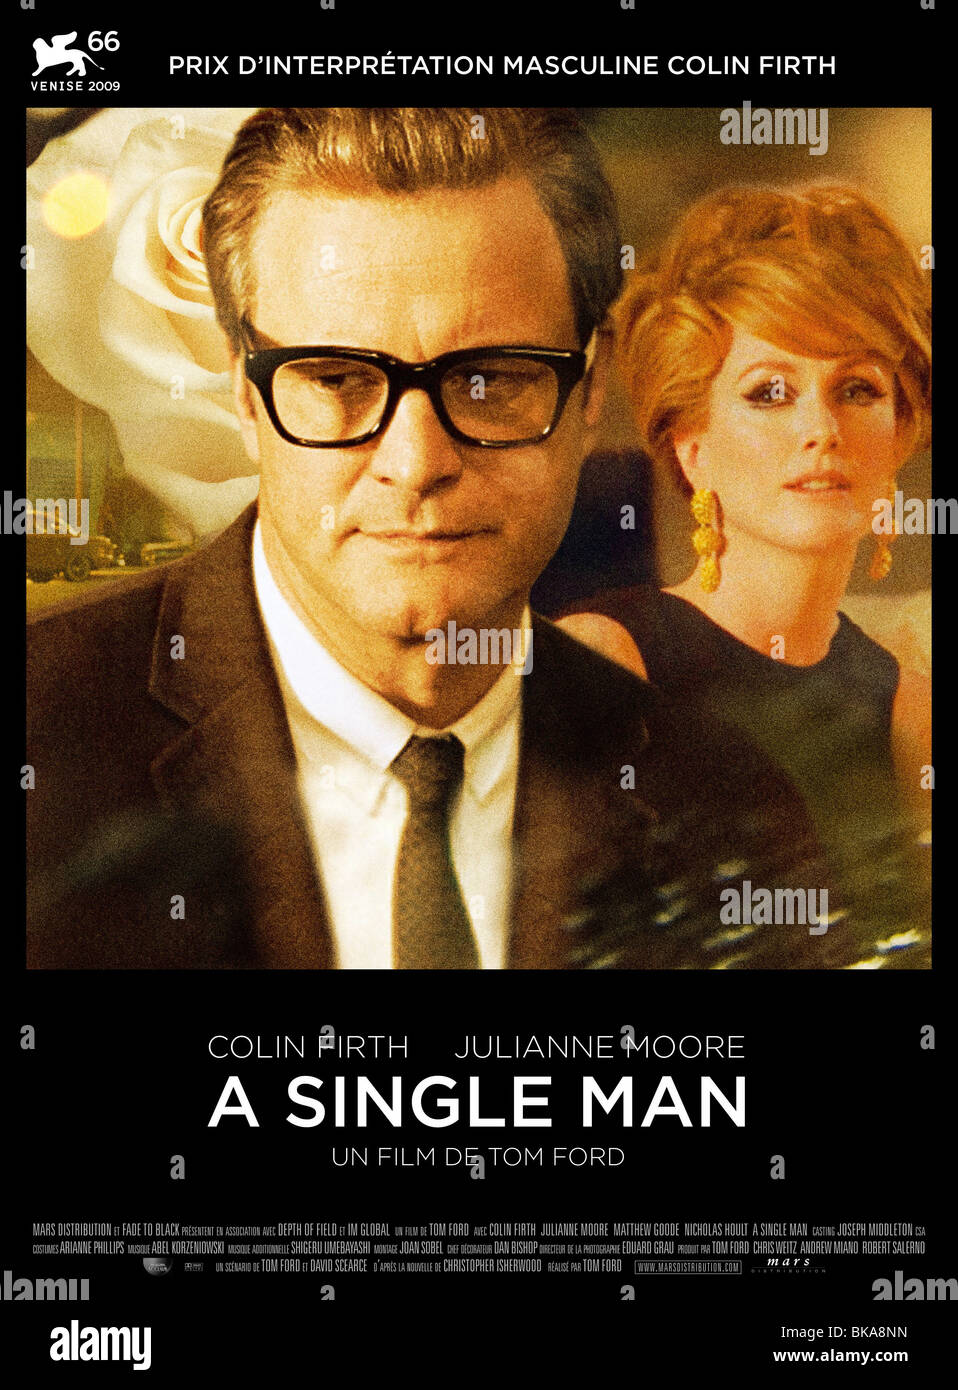 A Single Man Year : 2009 - USA Director : Tom Ford Colin Firth, Julianne Moore Movie poster (Fr) Stock Photo